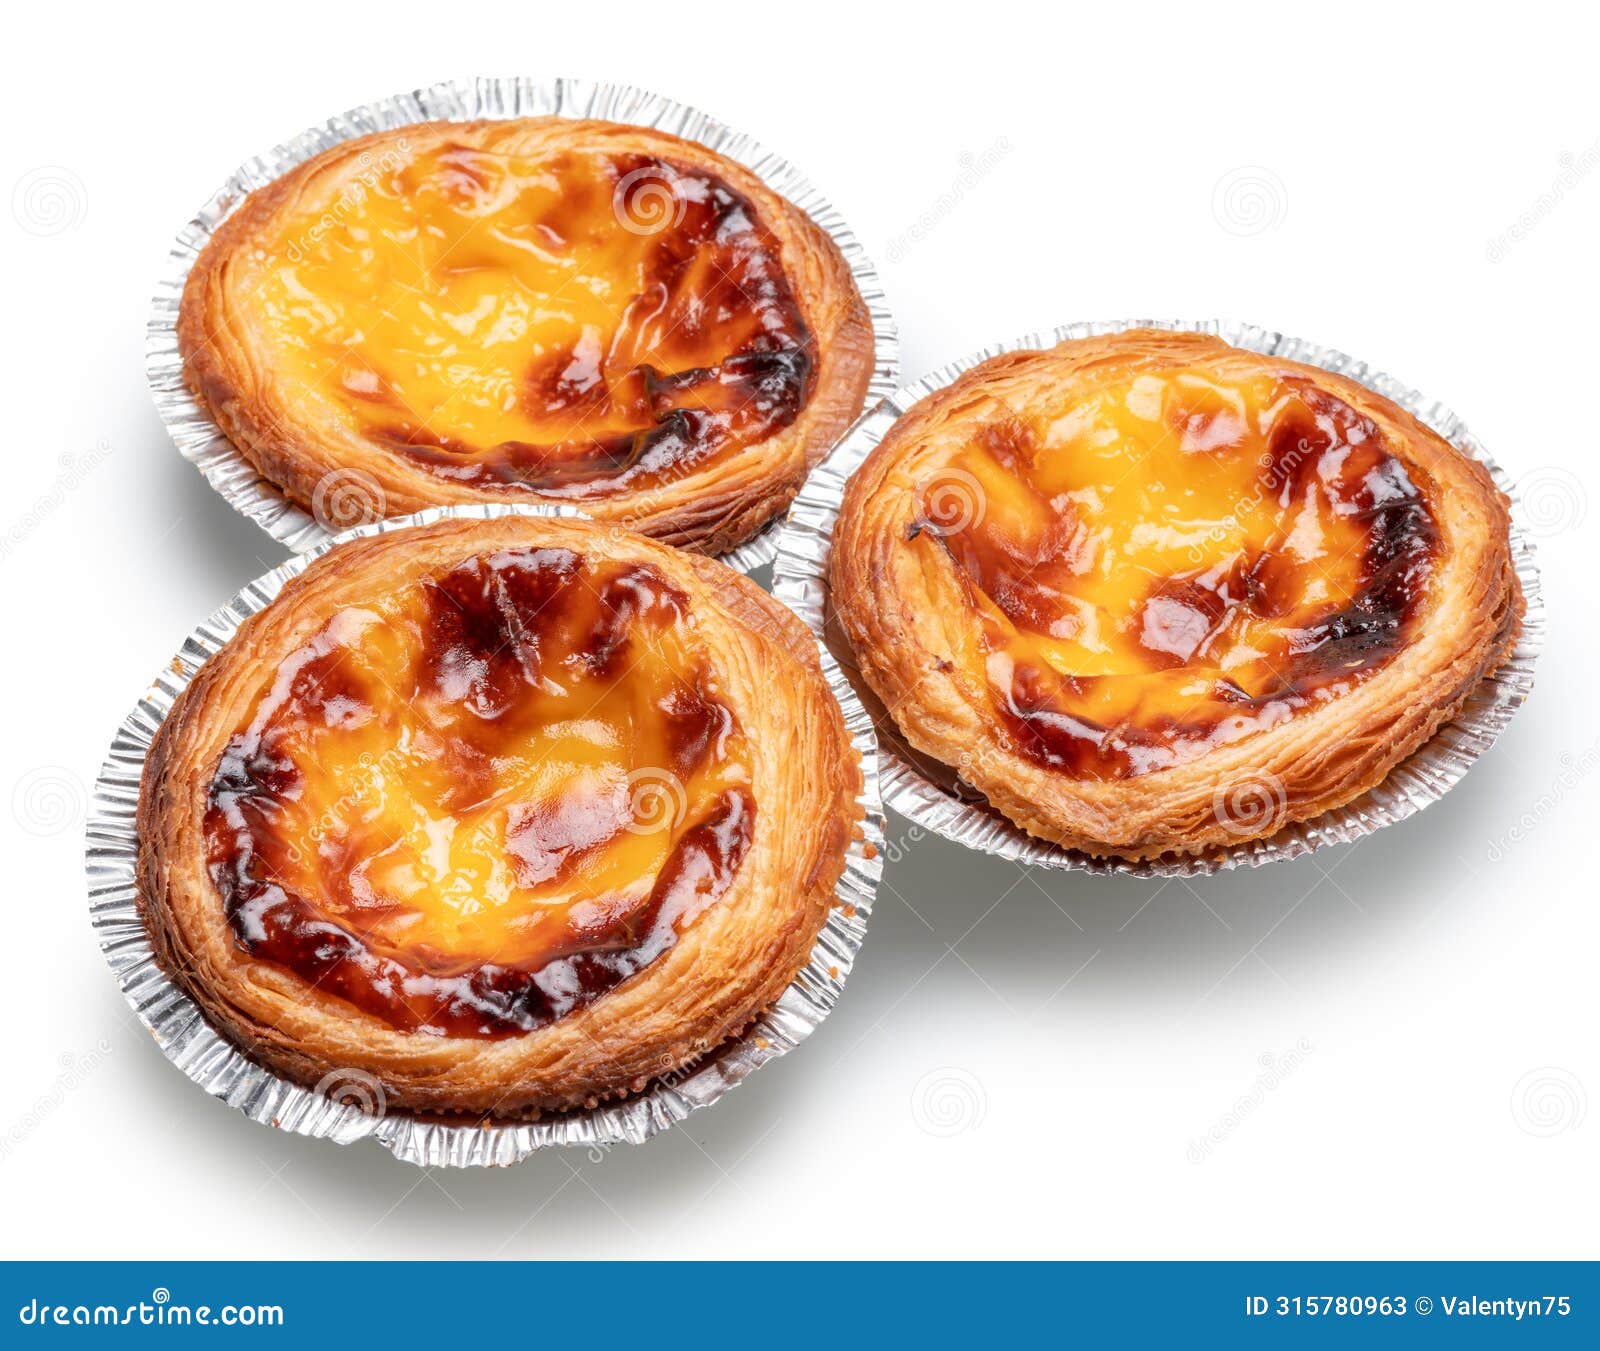 pastel de nata tarts in foil cups on white background. file contains clipping path